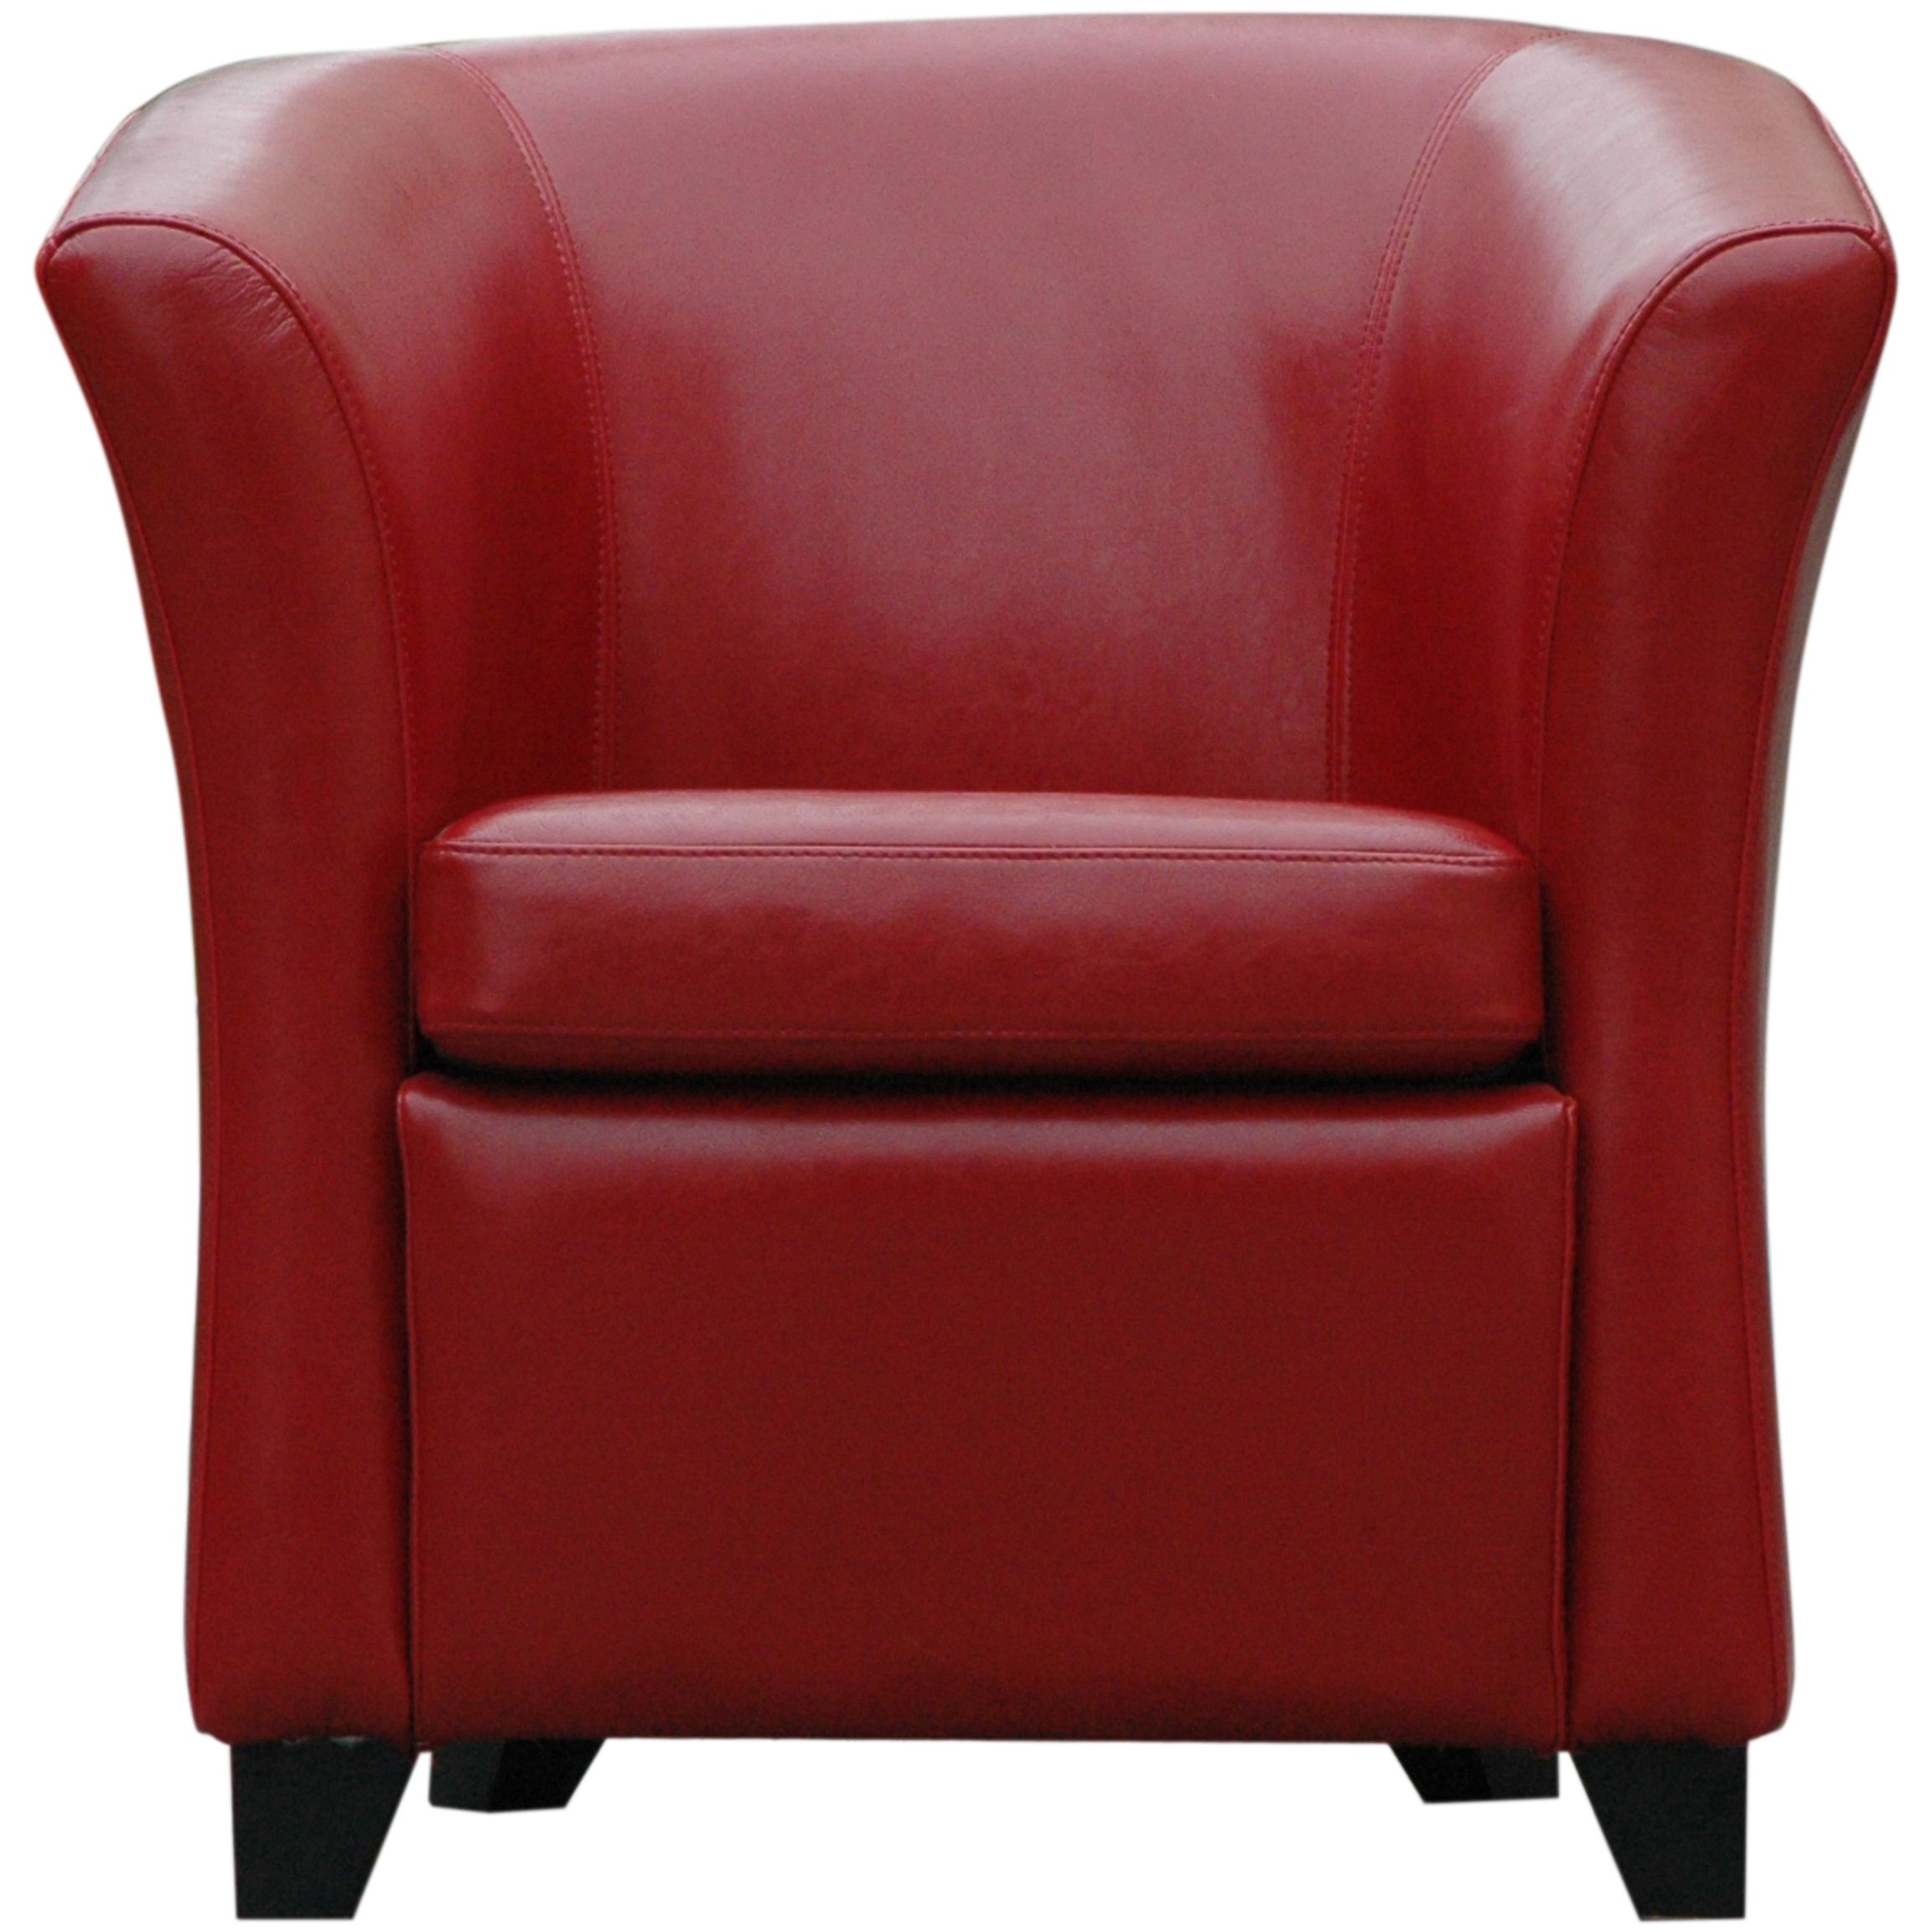 John Lewis Romeo Leather Club Chair, Red at JohnLewis